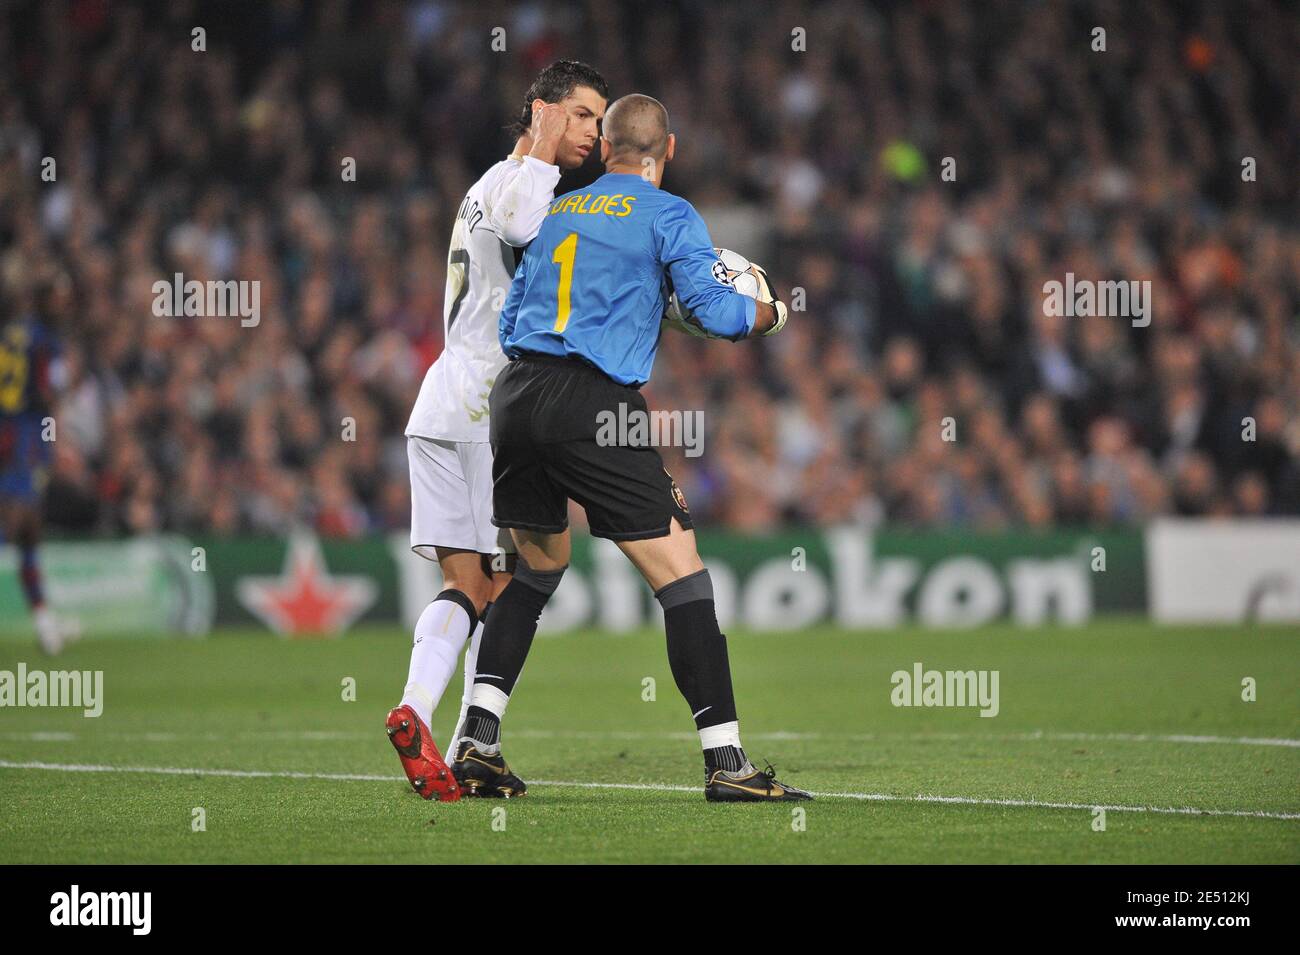 Manchester United's Cristiano Ronaldo looks Barcelona's goalkeeper Victor Valdes during the UEFA Champions League semi-finals, first leg, Soccer match, FC Barcelona vs Manchester United at the Nou Camp stadium in Barcelona, Spain on April 23, 2008. The match ended in a 0-0 draw. Photo by Steeve McMay/Cameleon/ABACAPRESS.COM Stock Photo